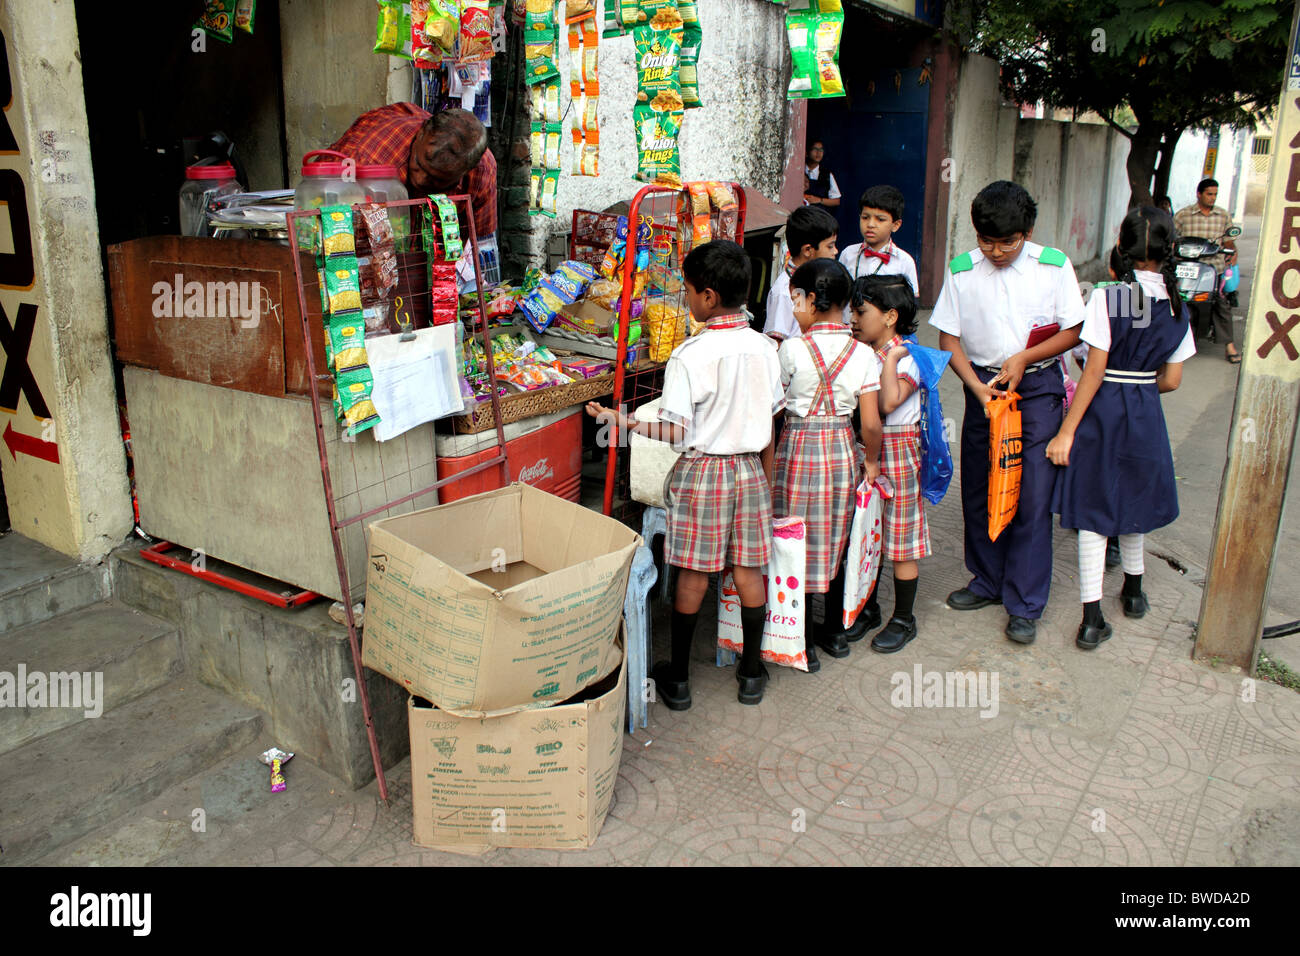 Indian school children in uniform gather around a small shop on the street to buy treats before going to school; Hyderabad India Stock Photo